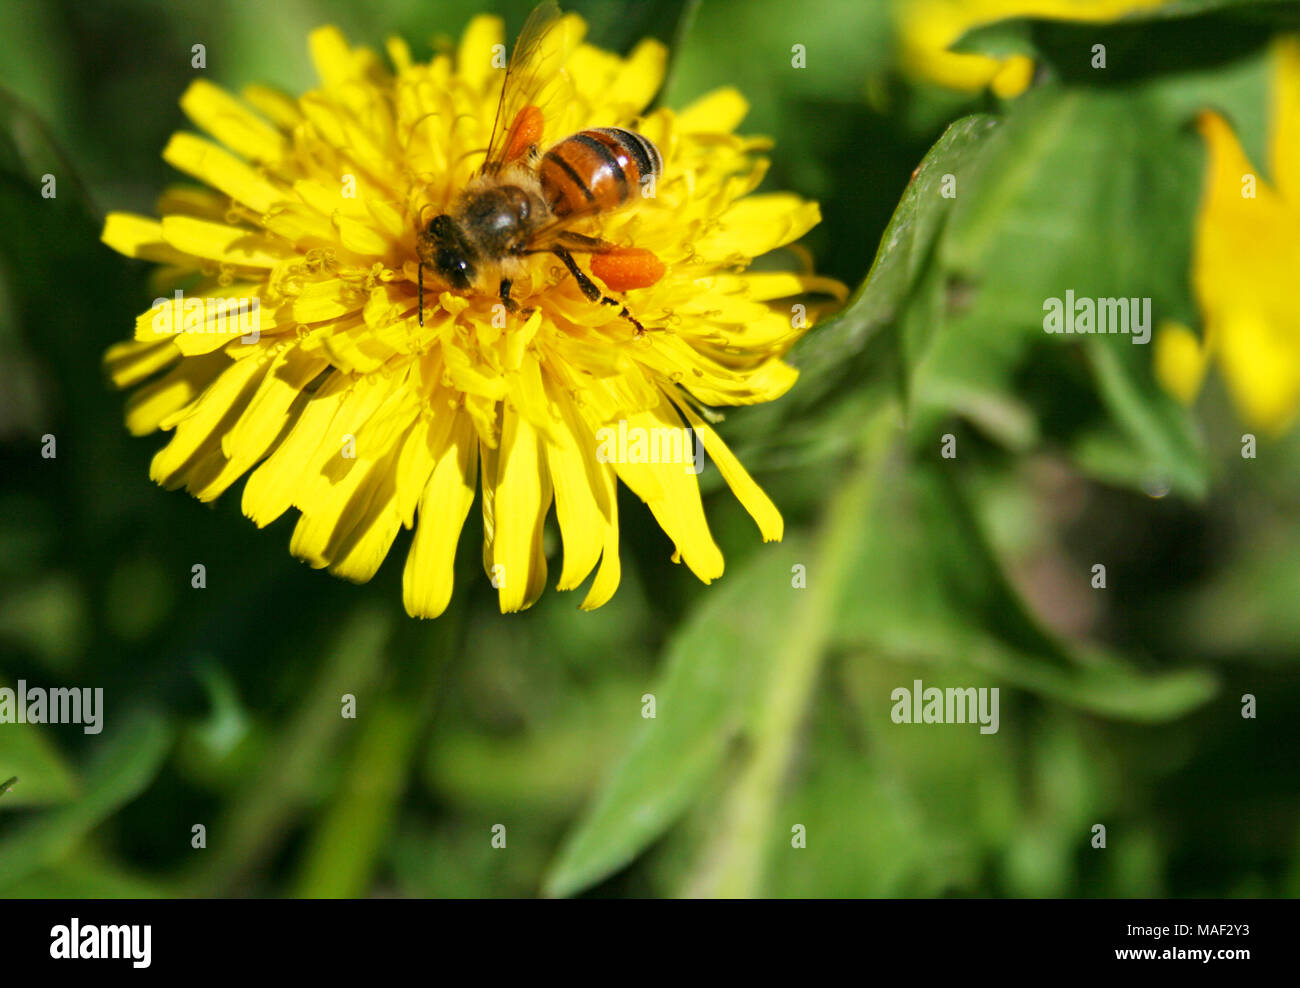 Close-up of bee pollinating yellow flower, dandelion in a green grass field in spring Stock Photo